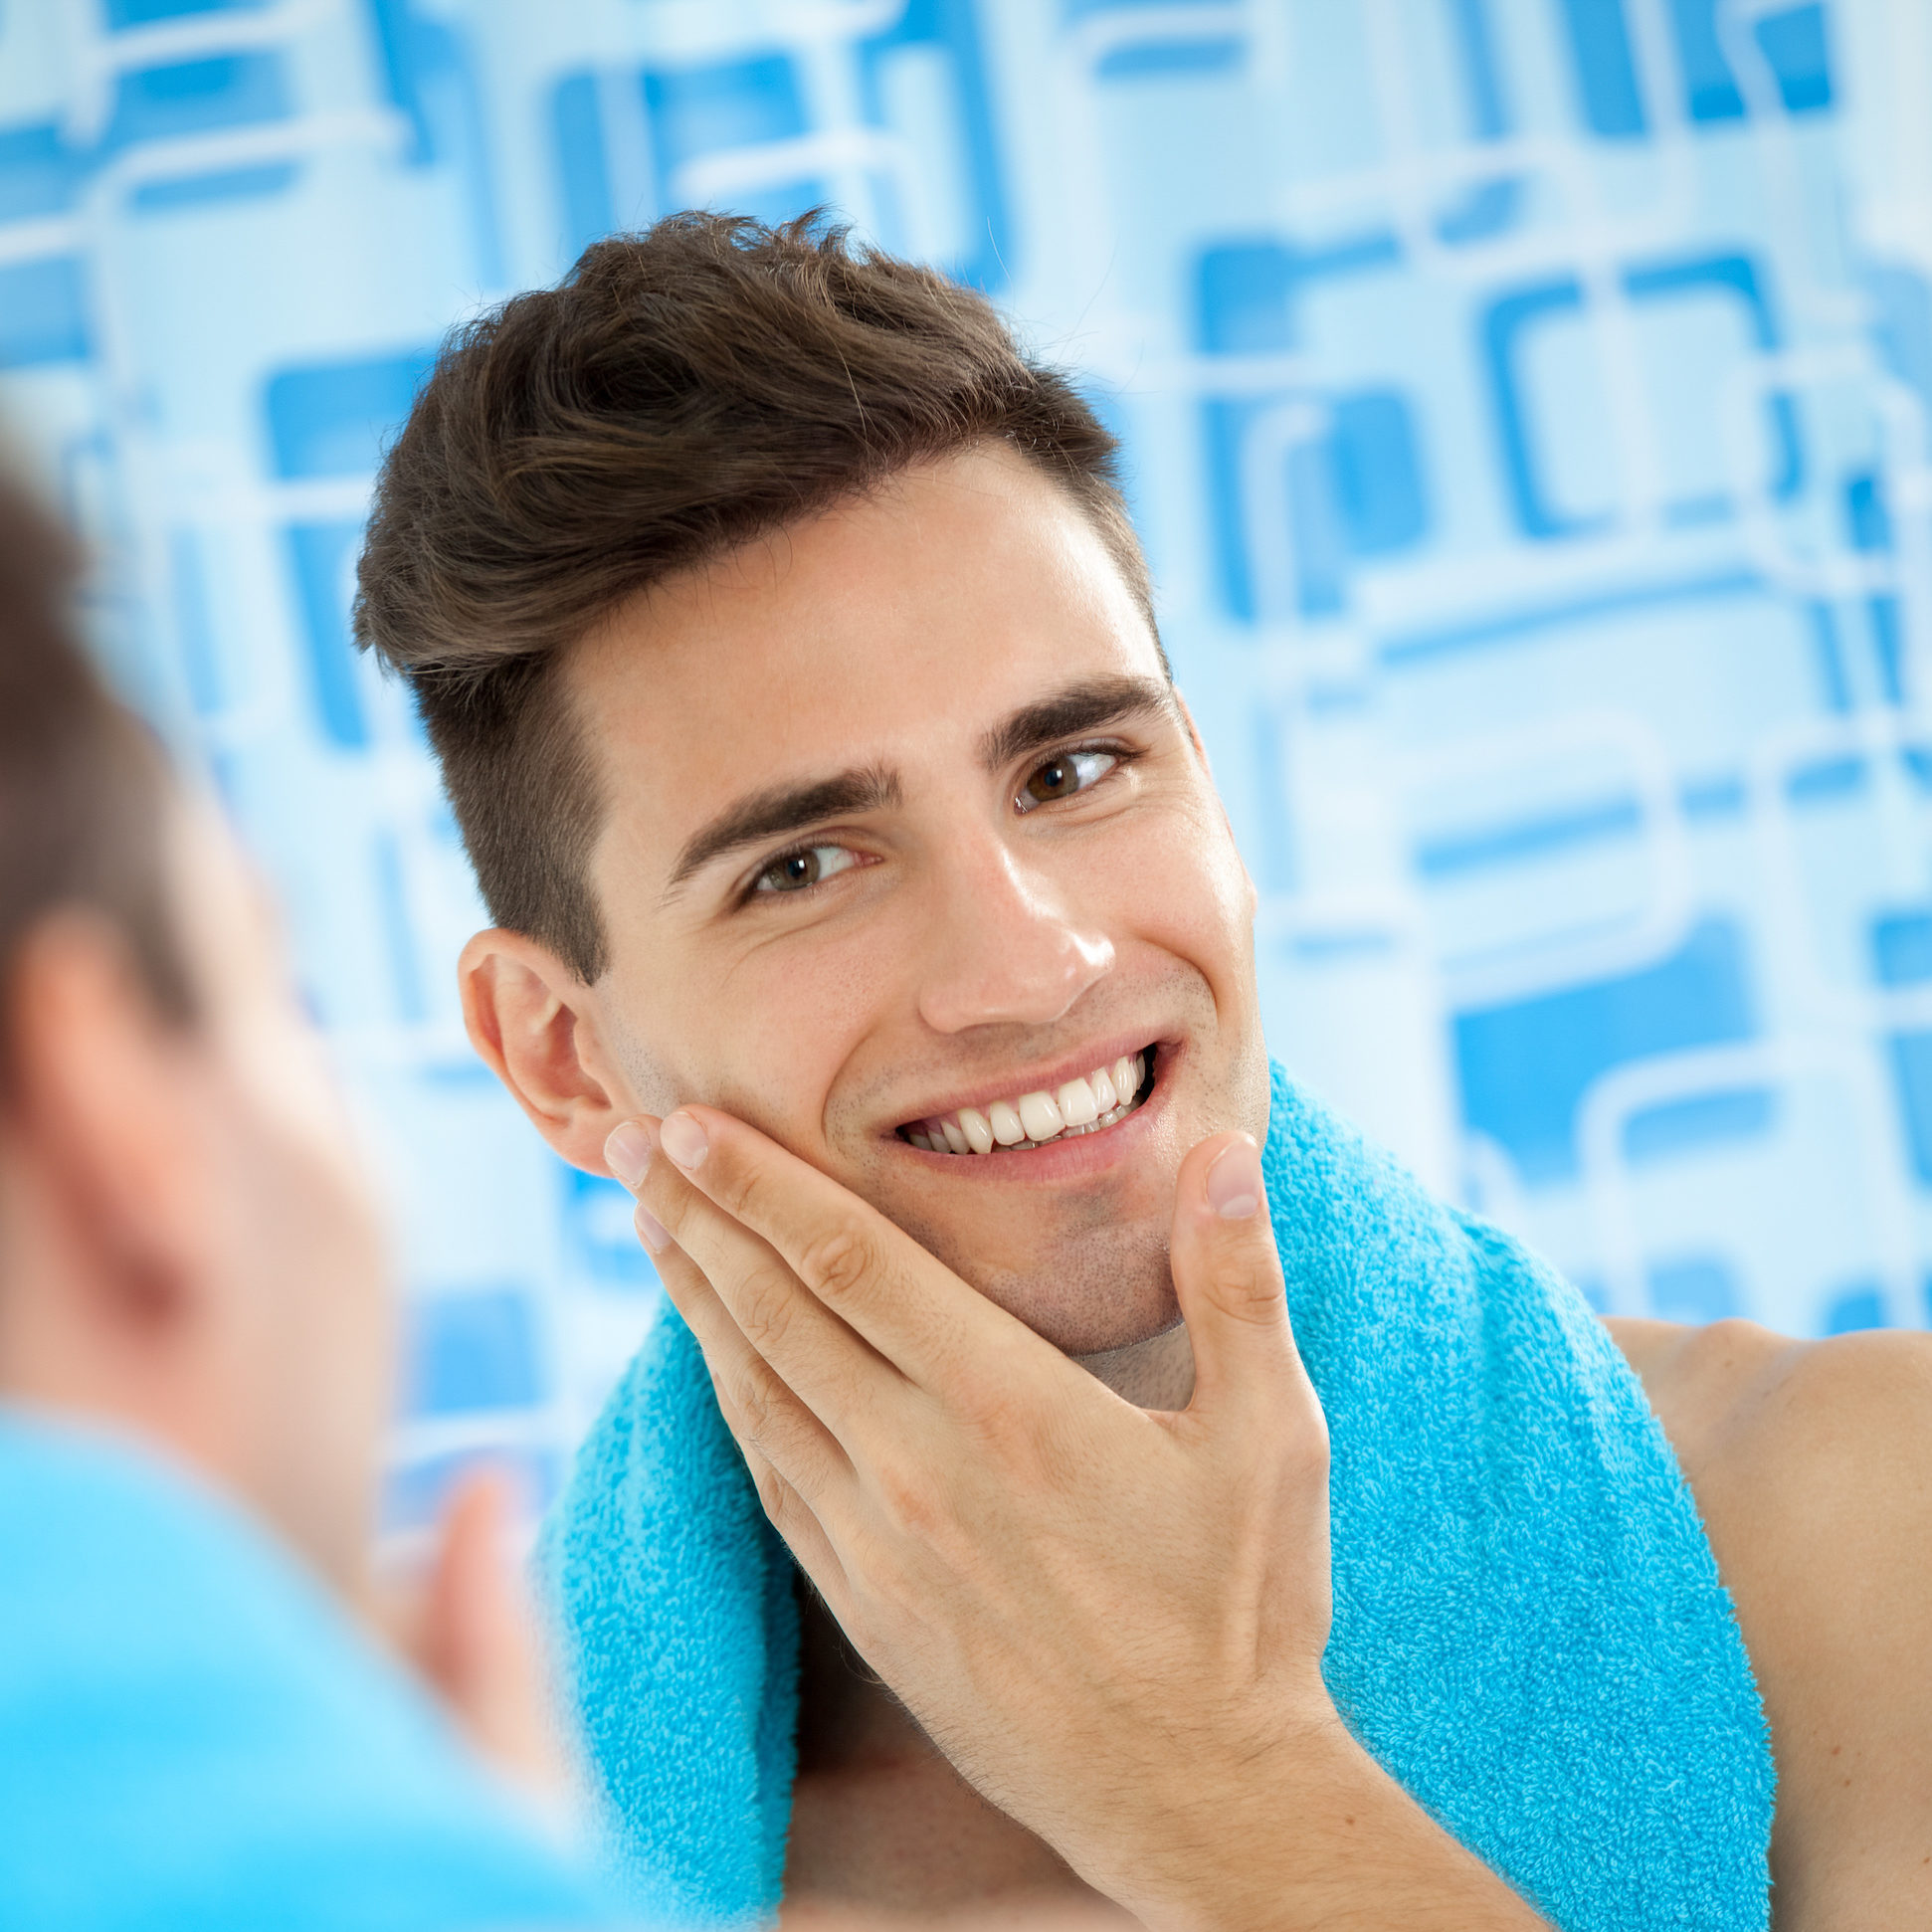 Exfoliation: What Is It & How Often Should I Do It?